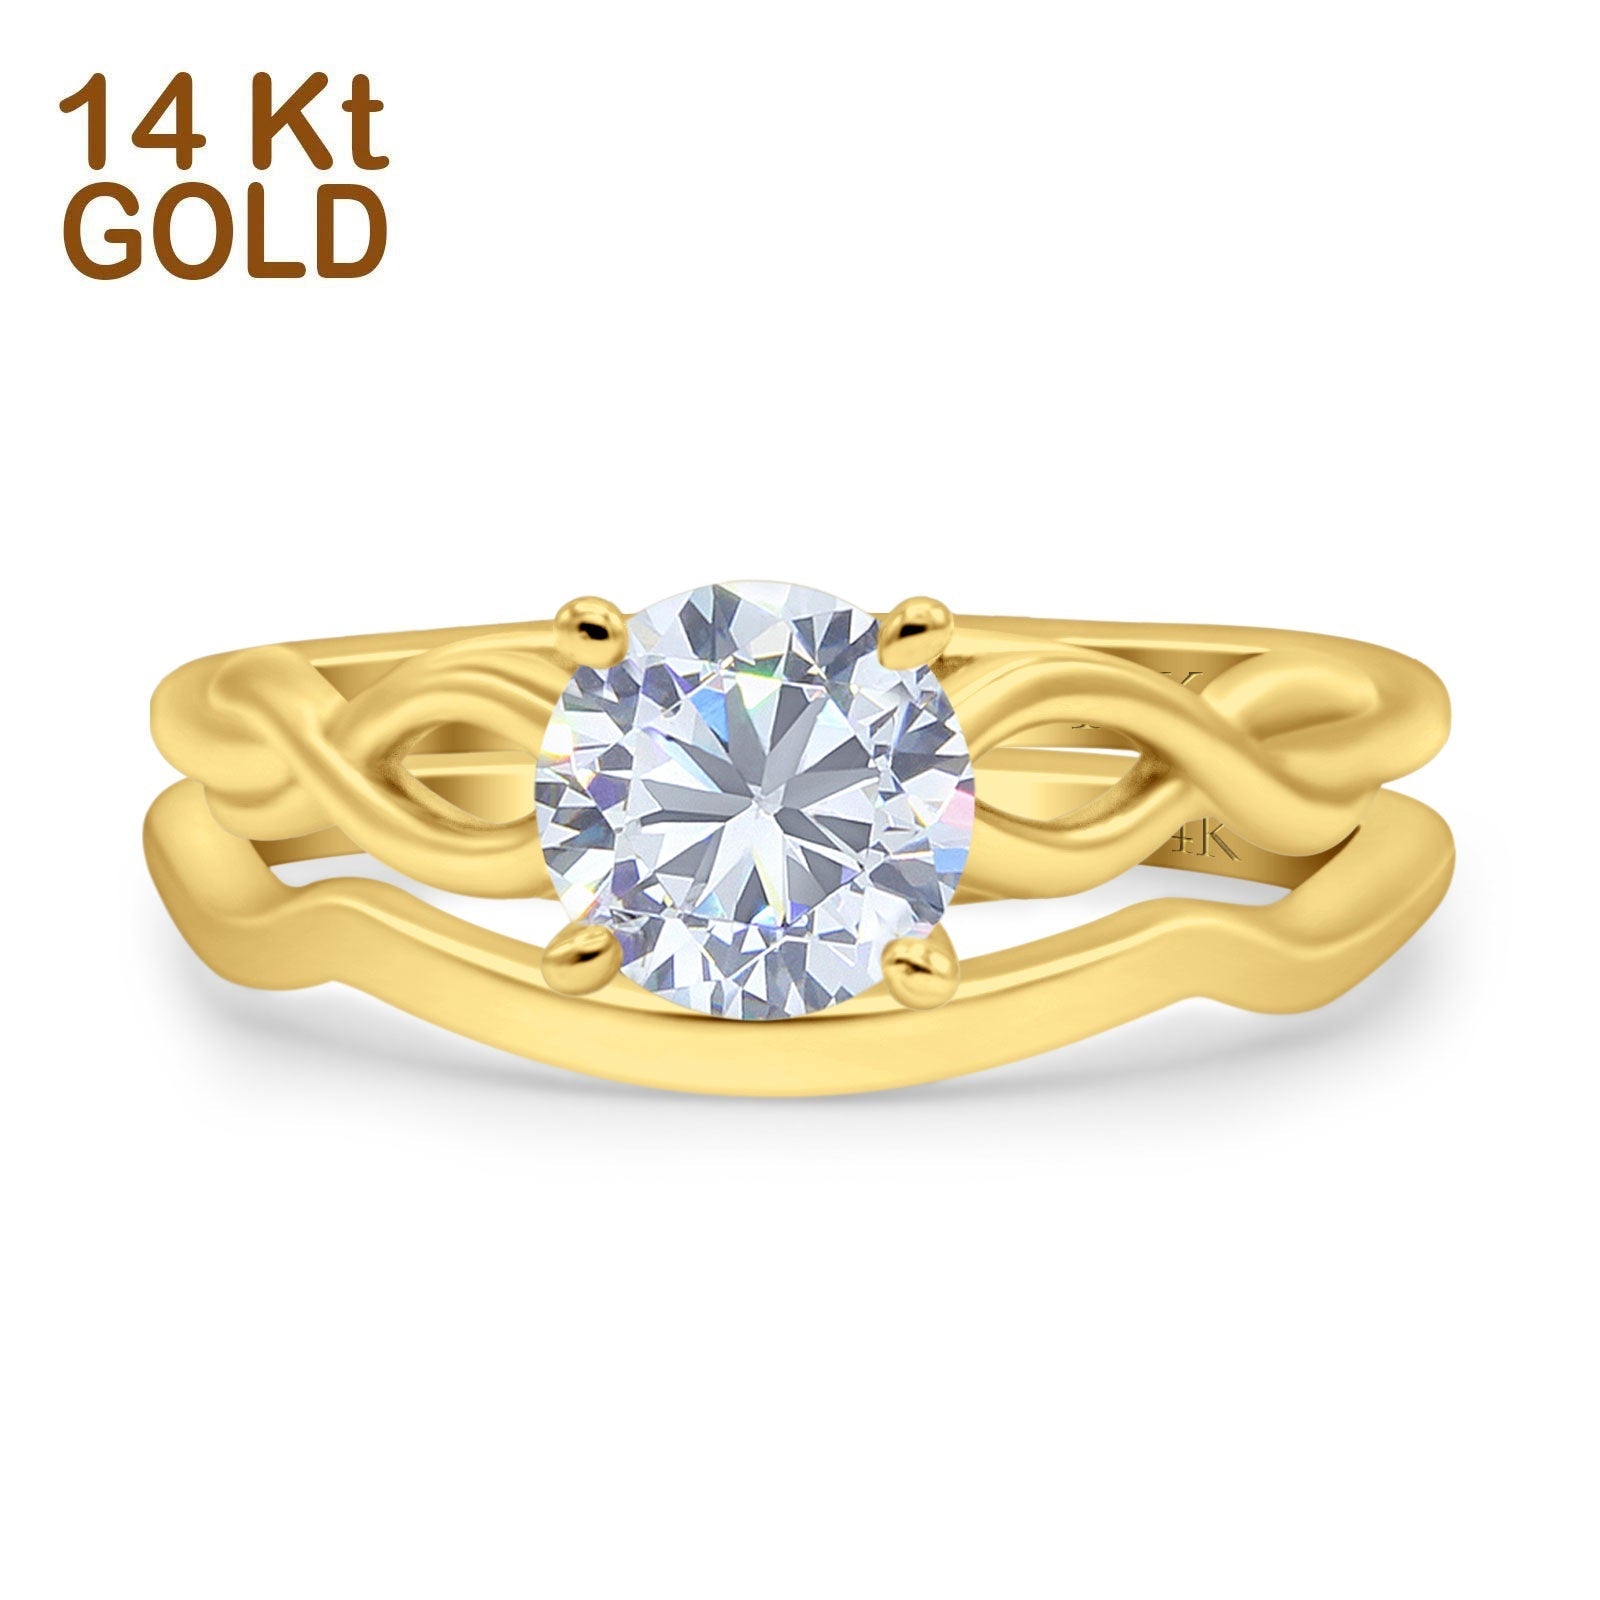 14K Gold Two Piece Round Shape Solitaire Celtic Bridal Set Ring Wedding Band Simulated CZ